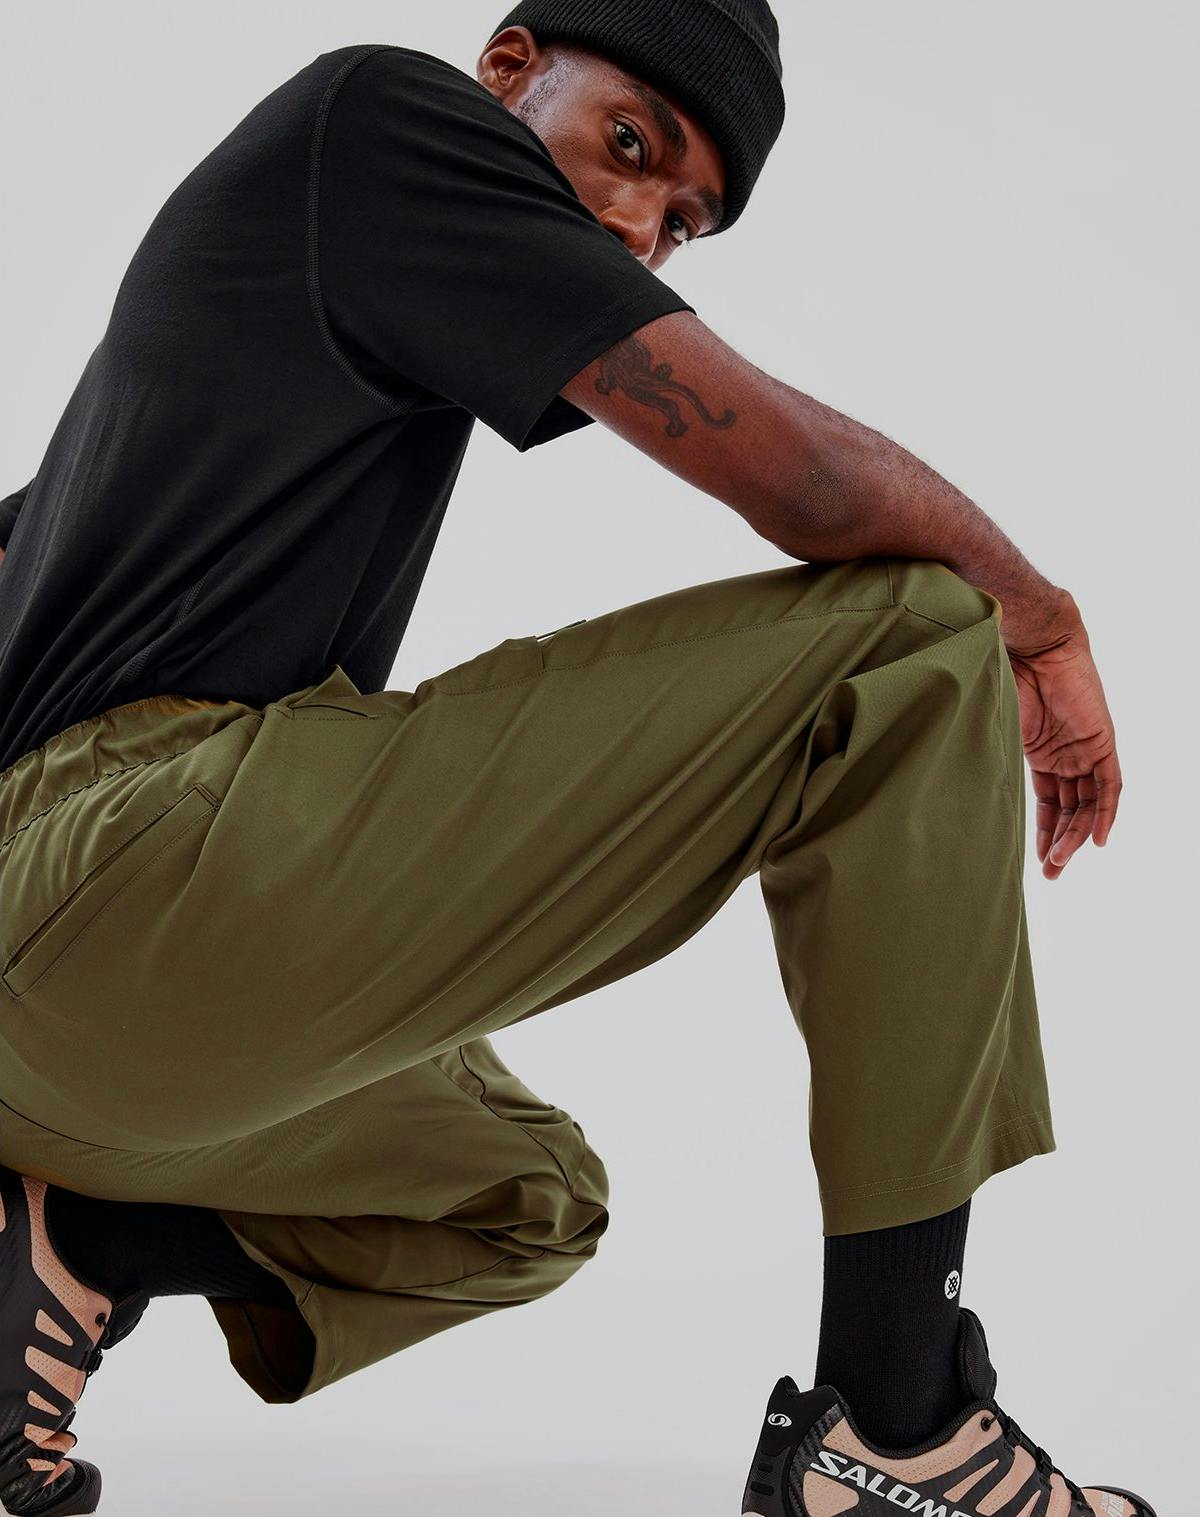 Foehn Brise Pant Review - Made for Ultralight Travel?? - The Daily Grog